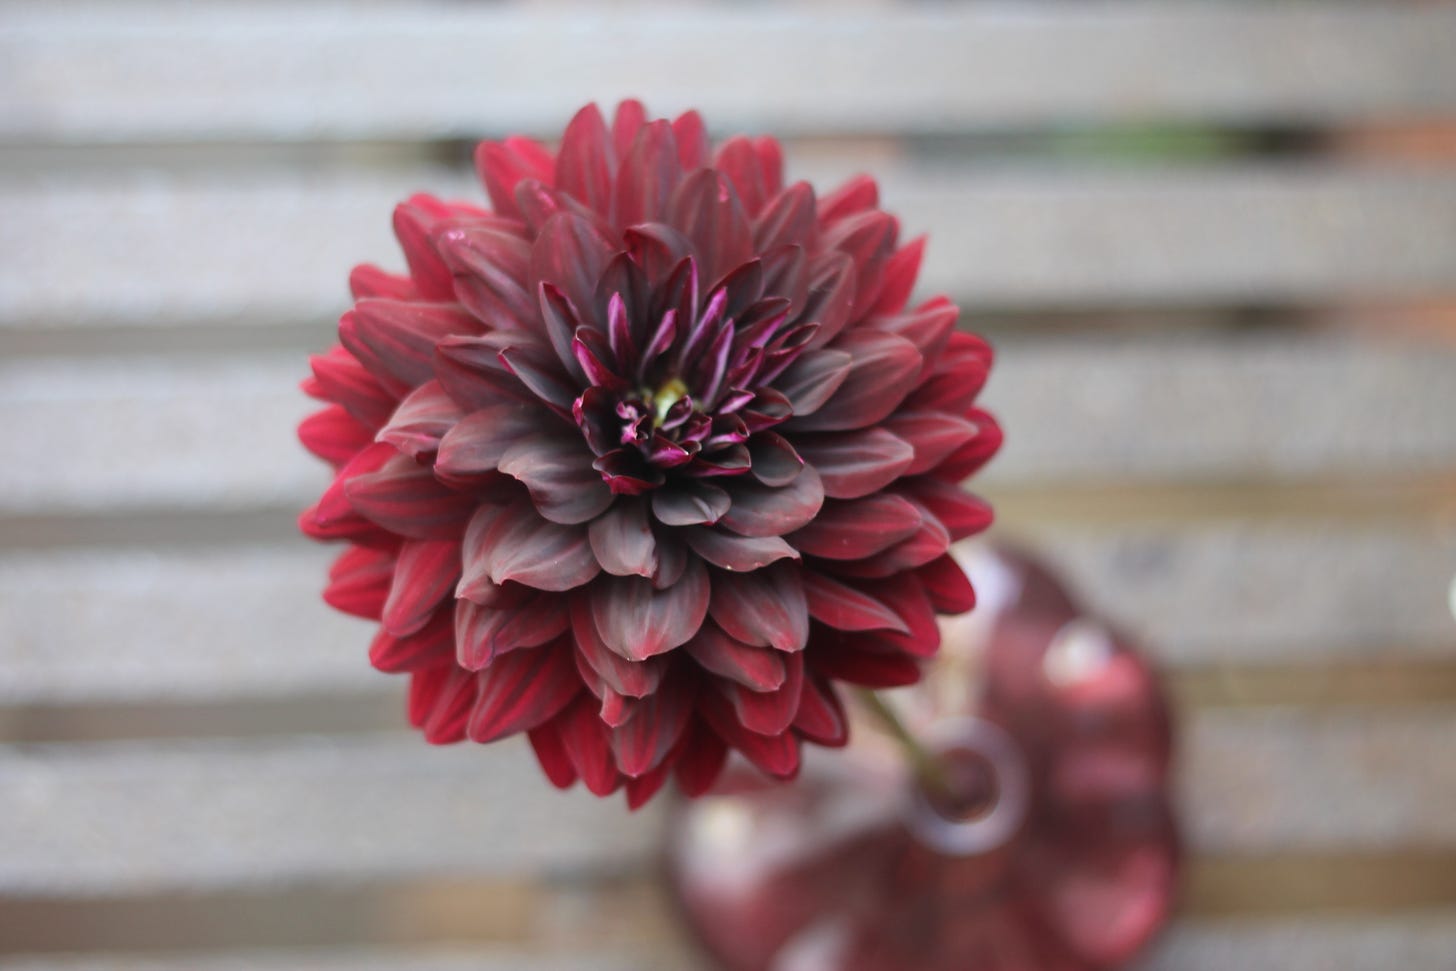 A dark maroon waterlily shaped dahlia in an out of focus pink vase.